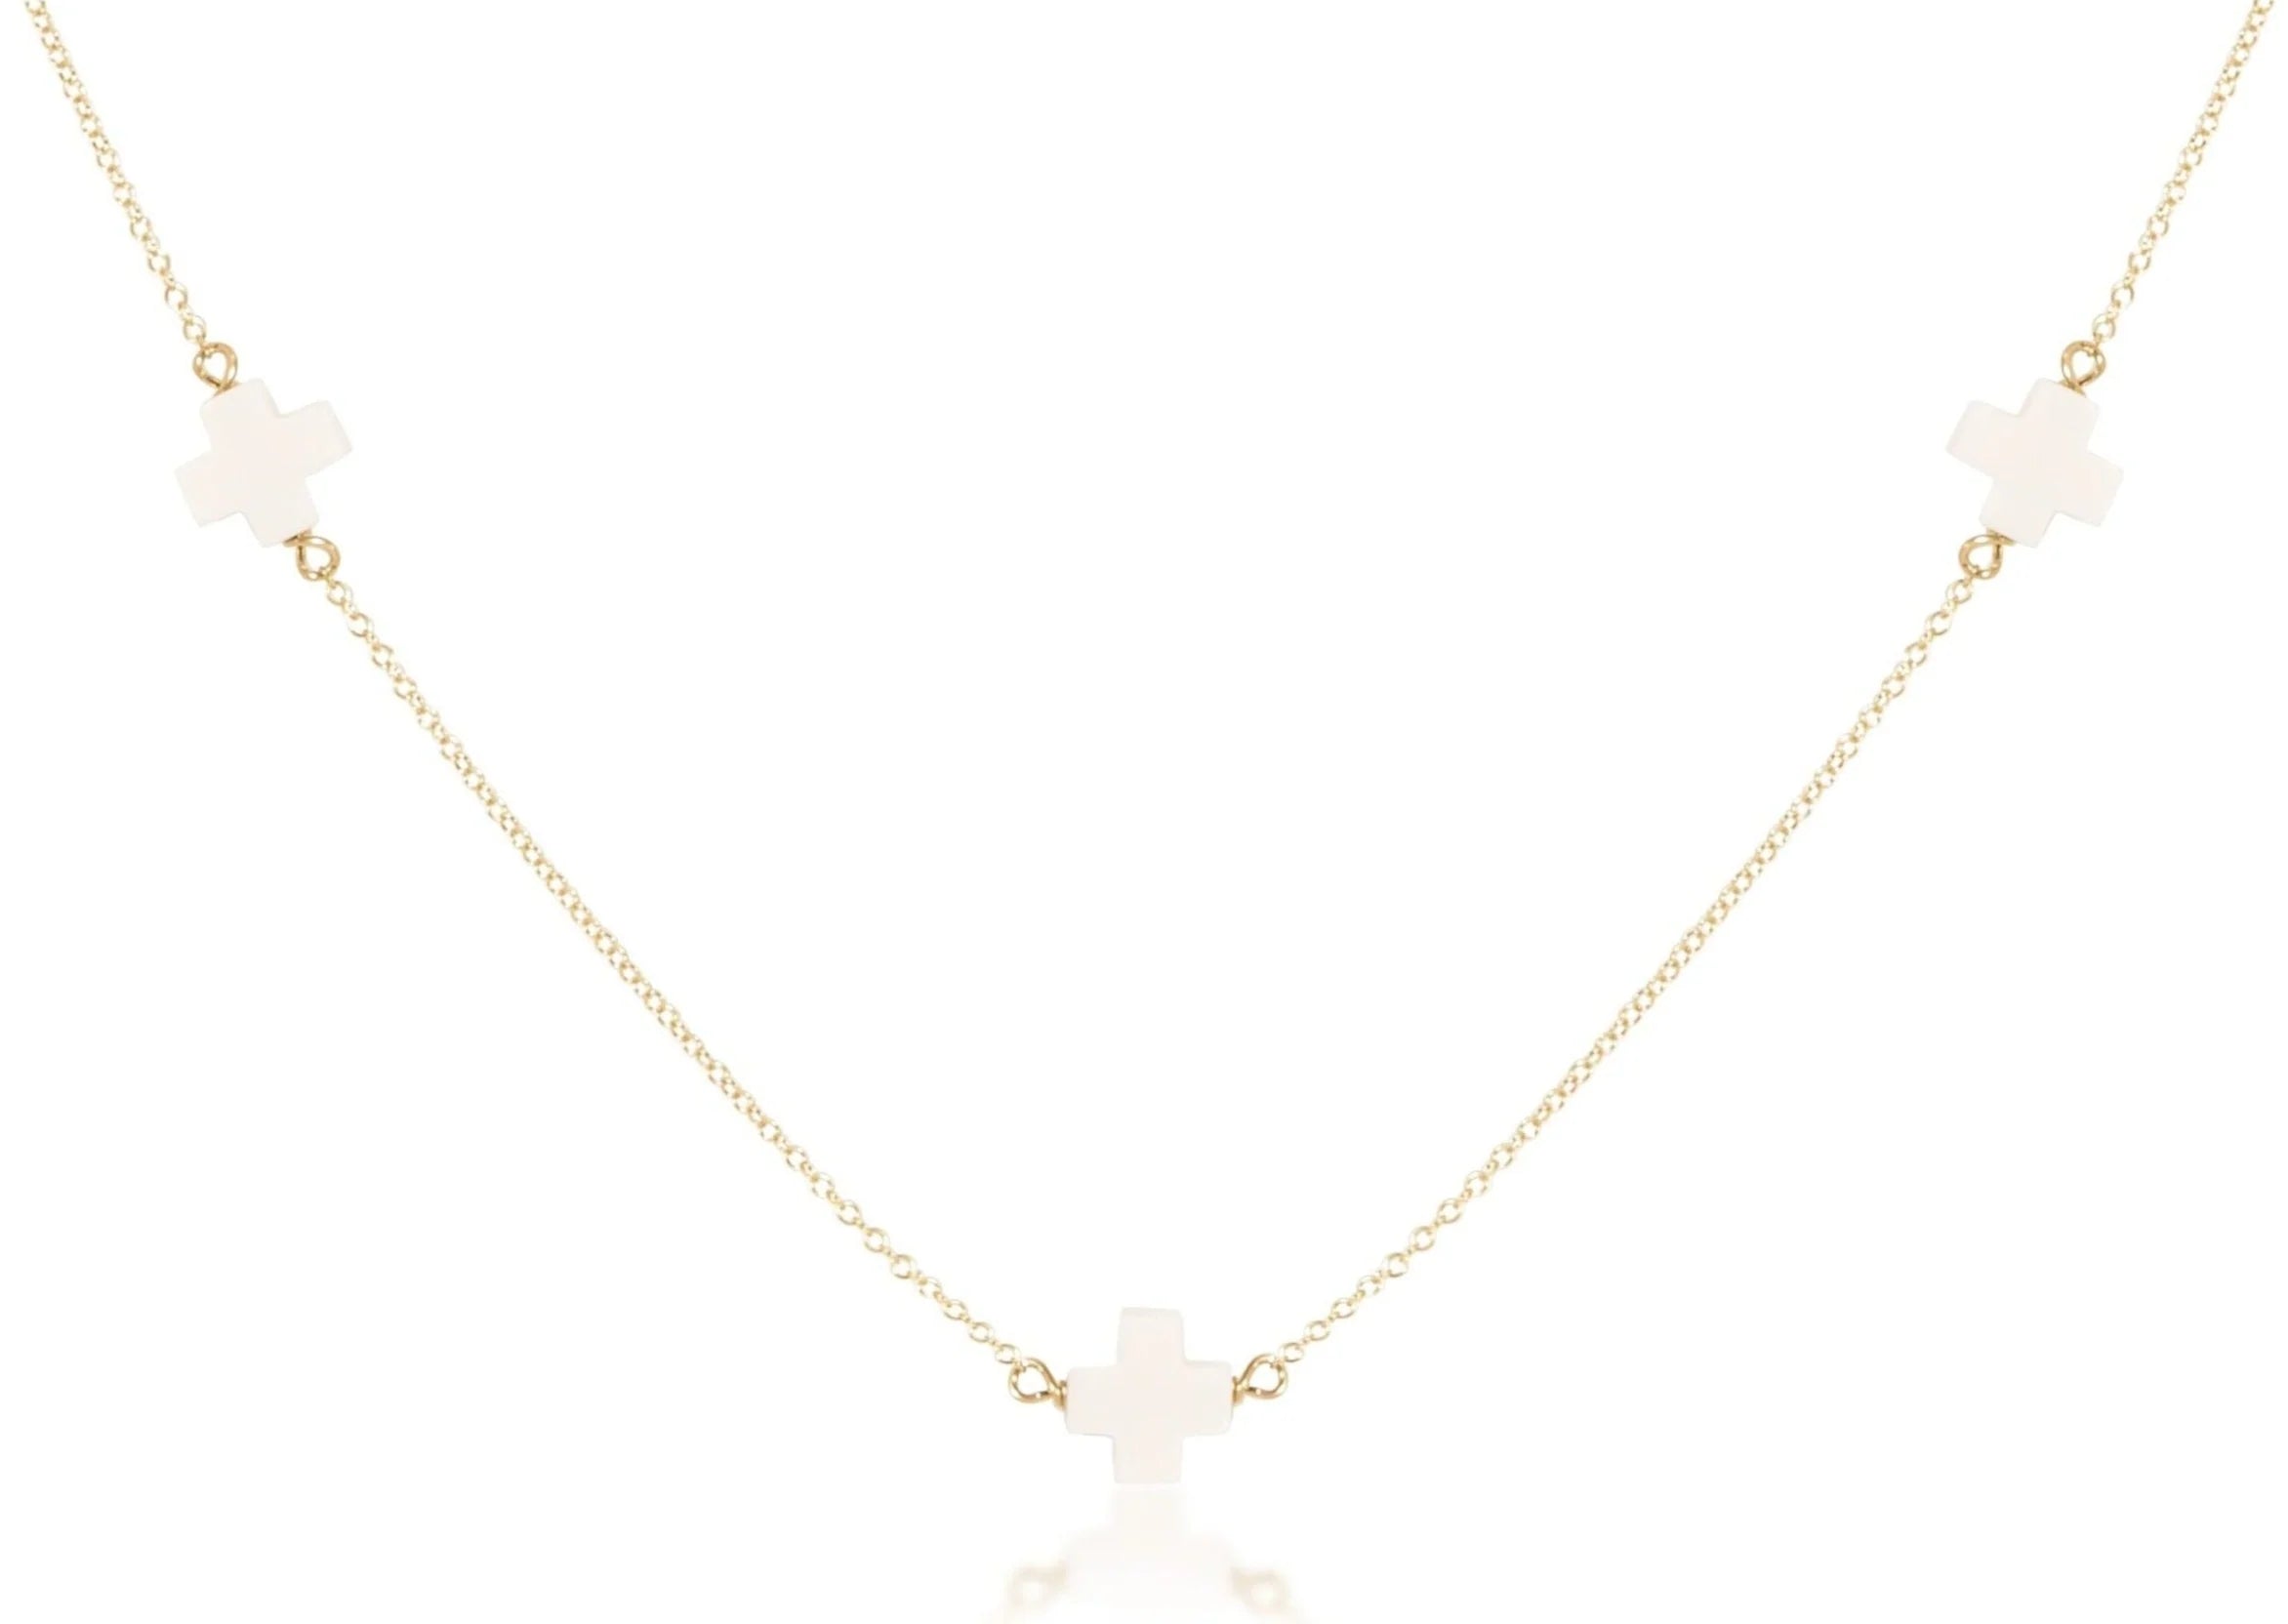 Off White Signature Cross Simplicity Necklace-Necklaces-eNewton-The Lovely Closet, Women's Fashion Boutique in Alexandria, KY